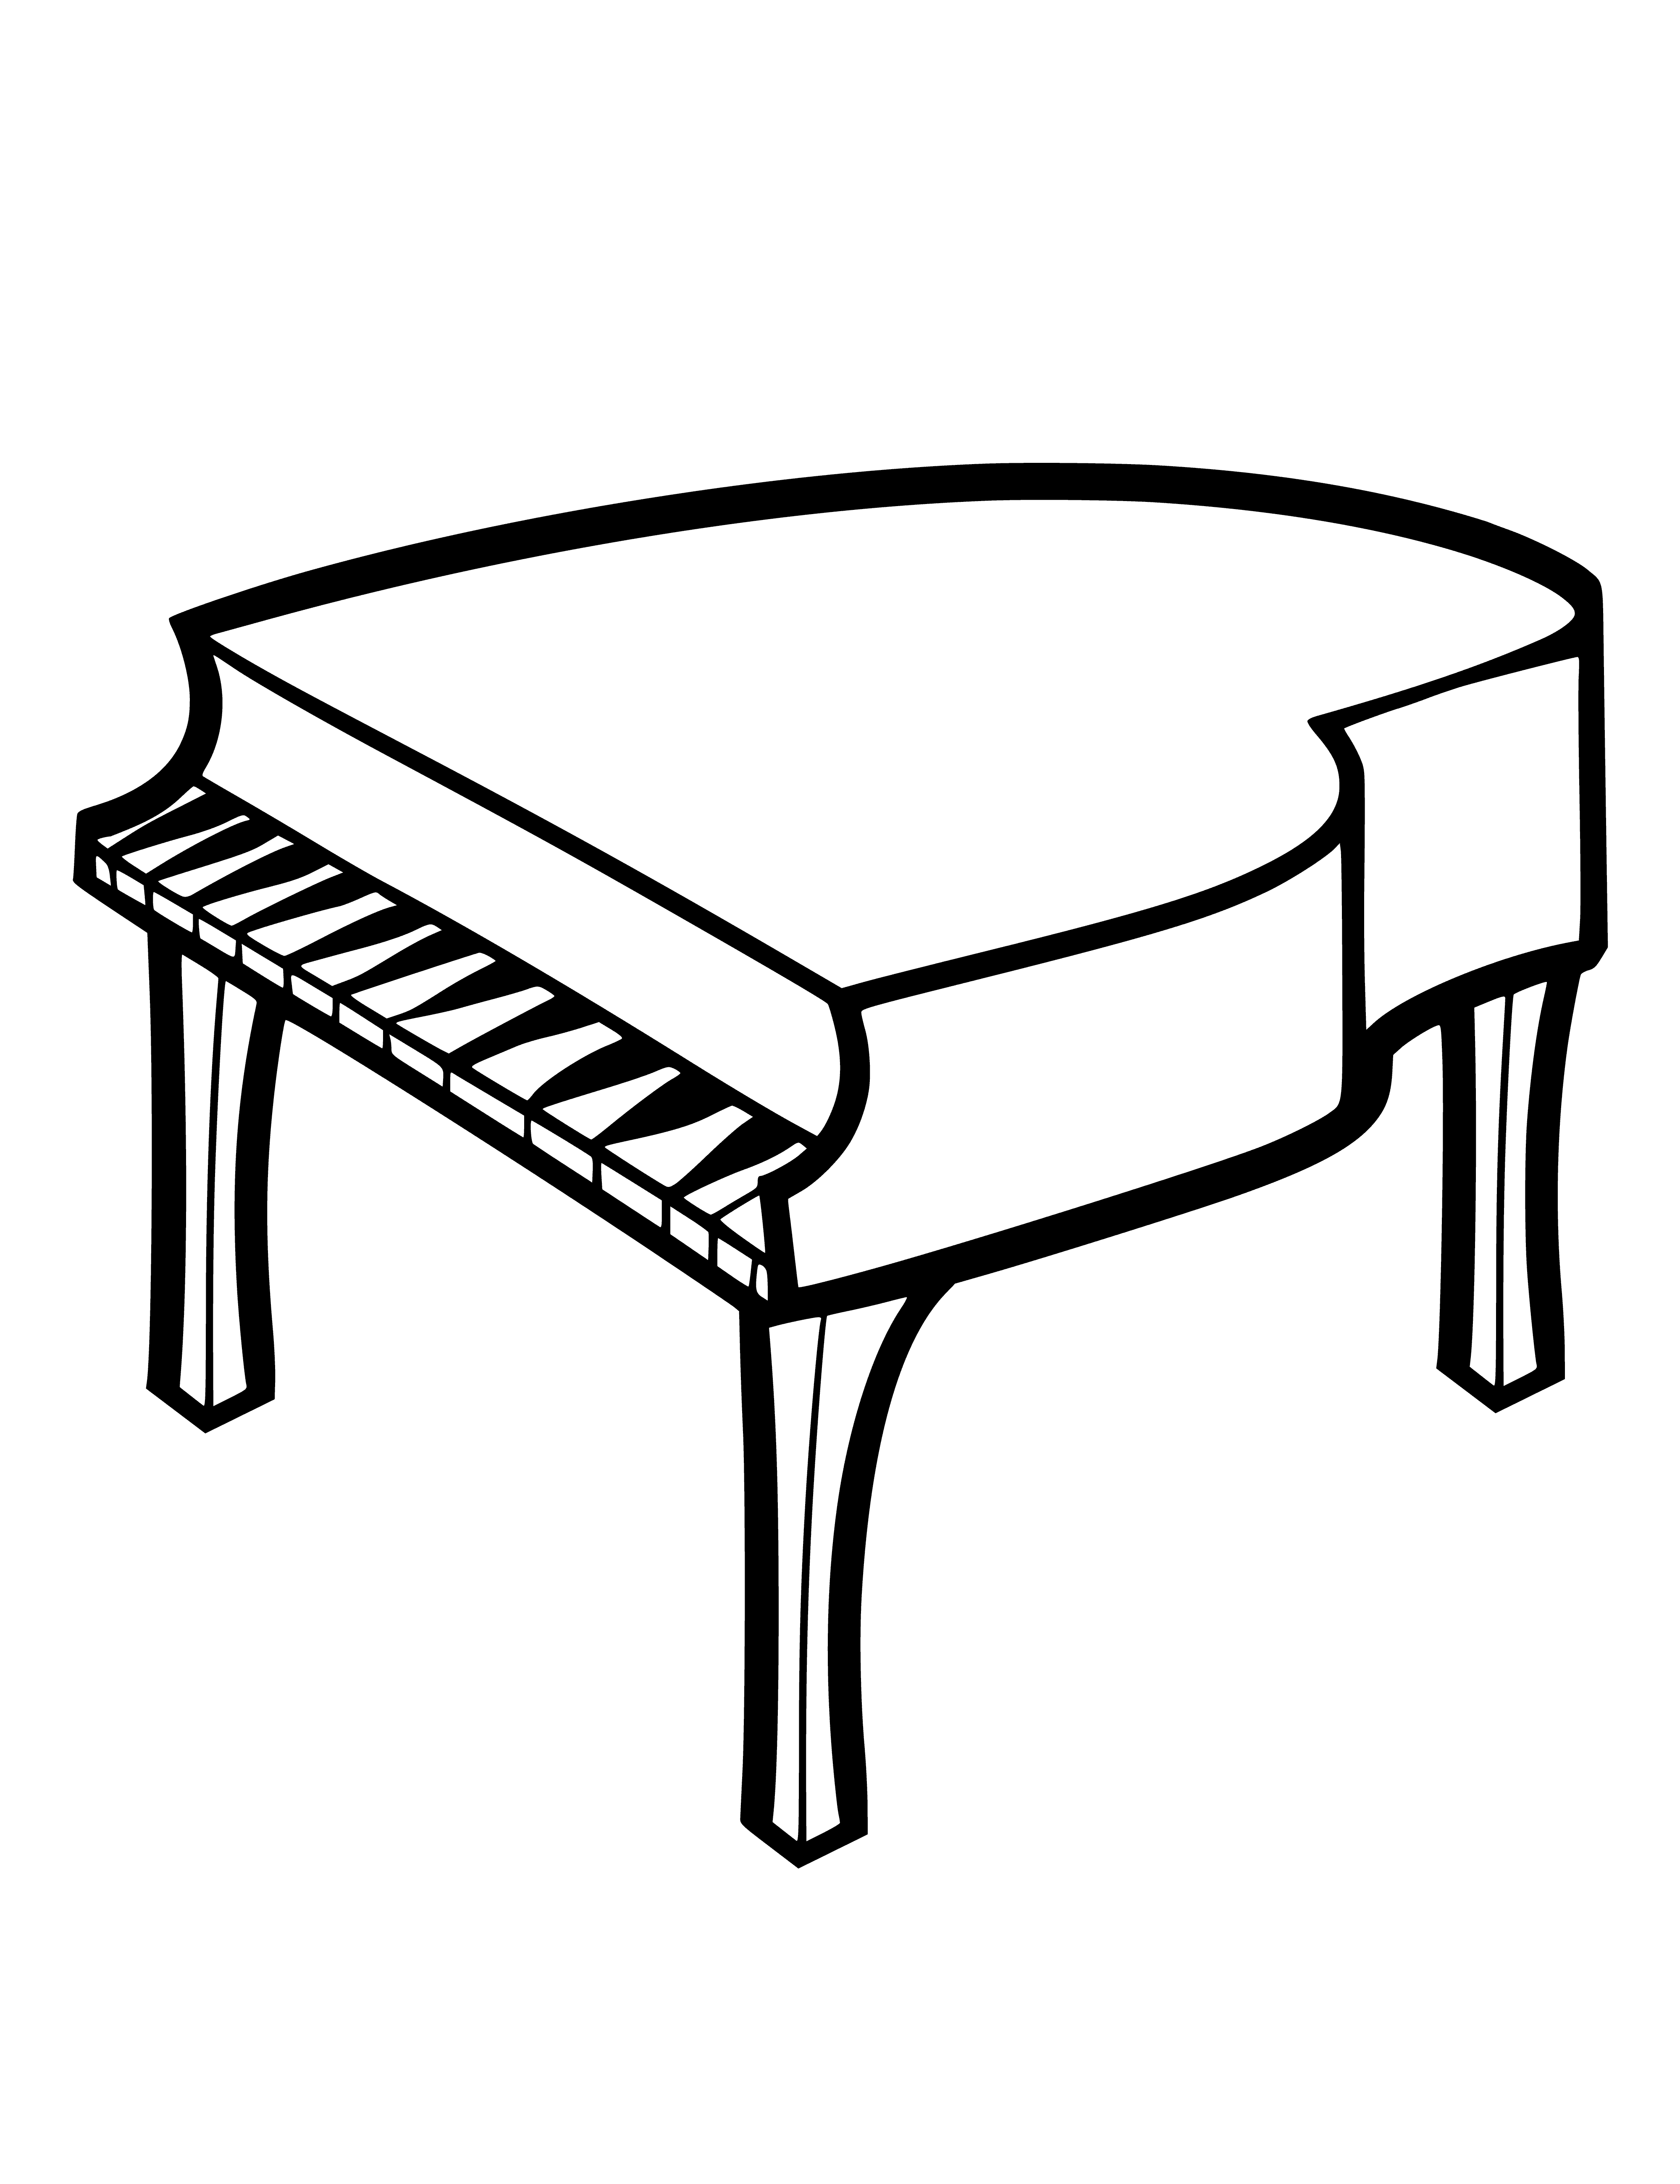 coloring page: Grand piano: large instrument with long rectangular shape, keyboard of black/white keys, and pedals at the base. #Music